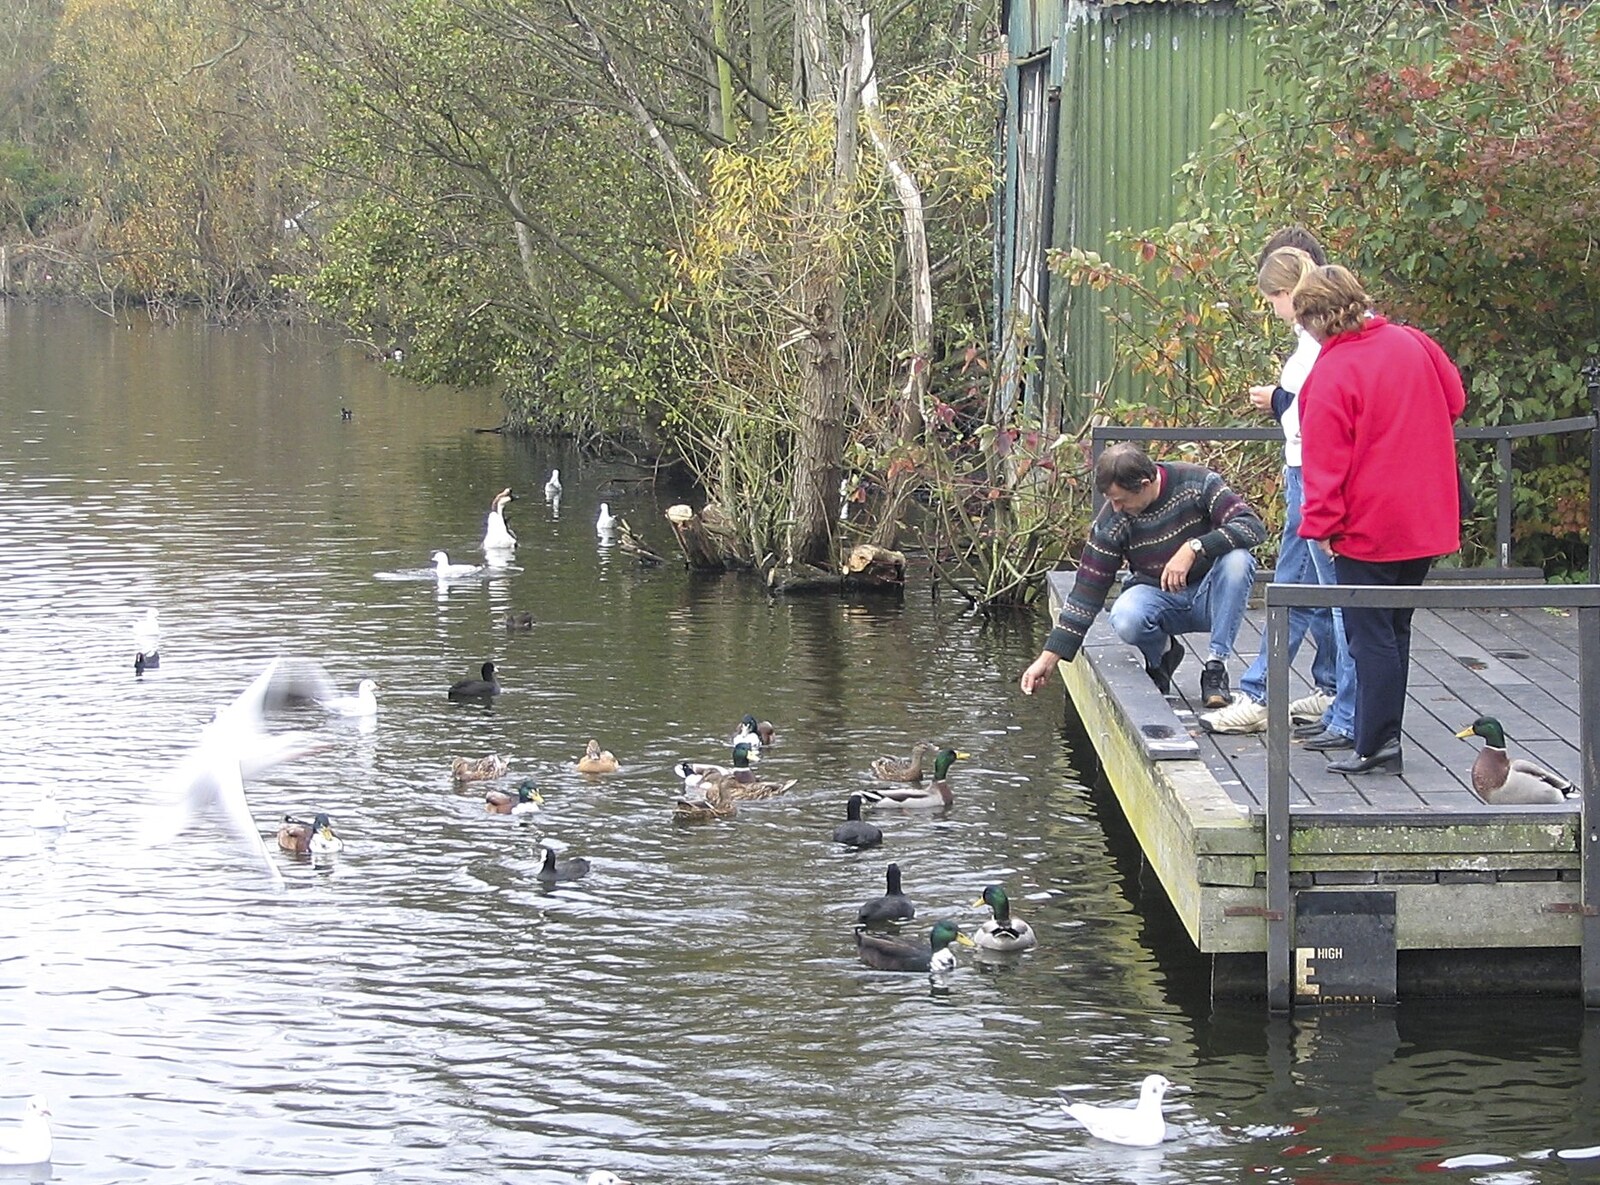 More duck feeding from Feeding the Ducks: a Diss and Norwich Miscellany - 7th November 2004